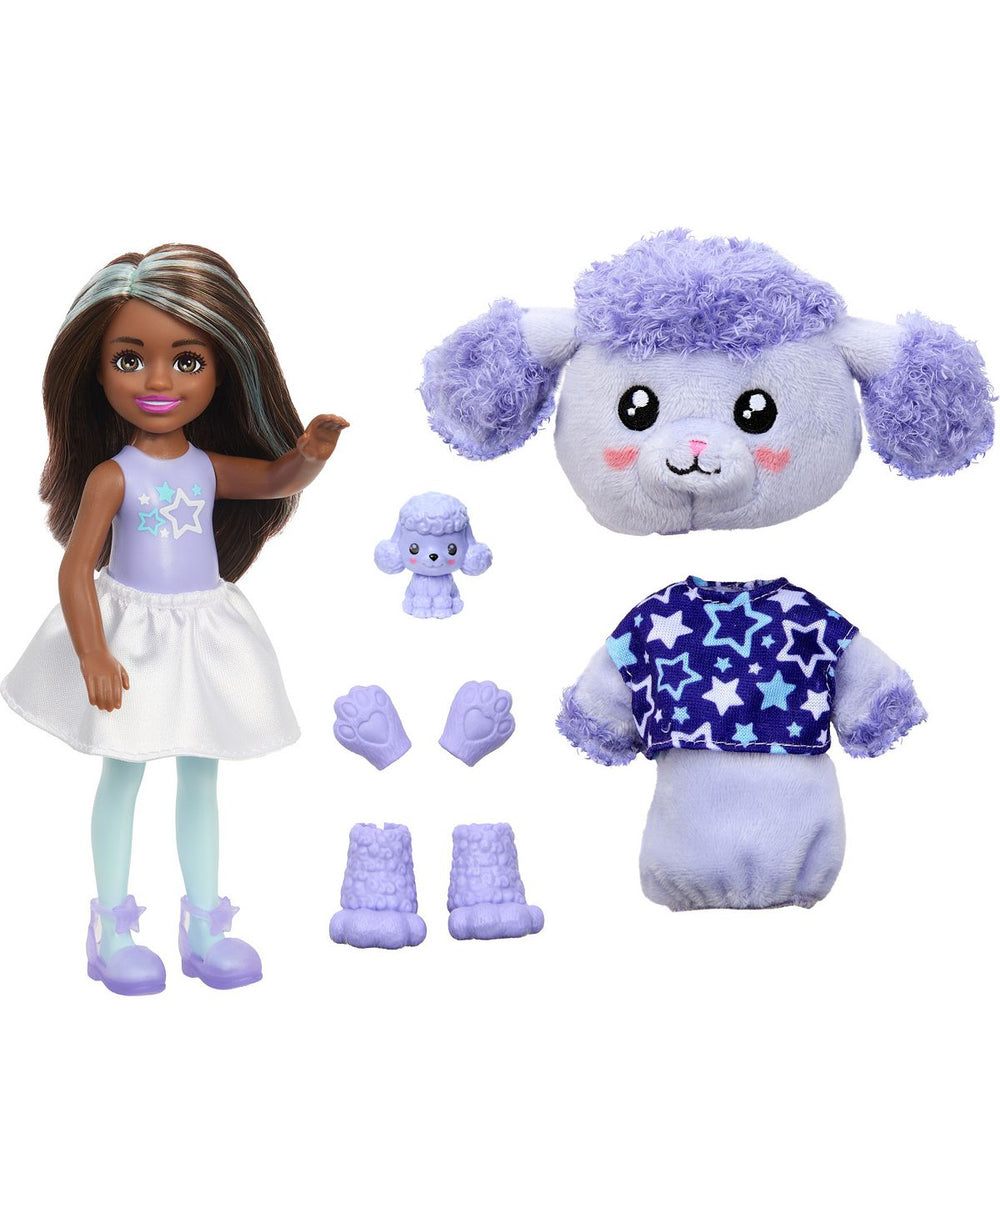 Barbie Cutie Reveal Chelsea Doll with Plush Puppy Costume and Accessories